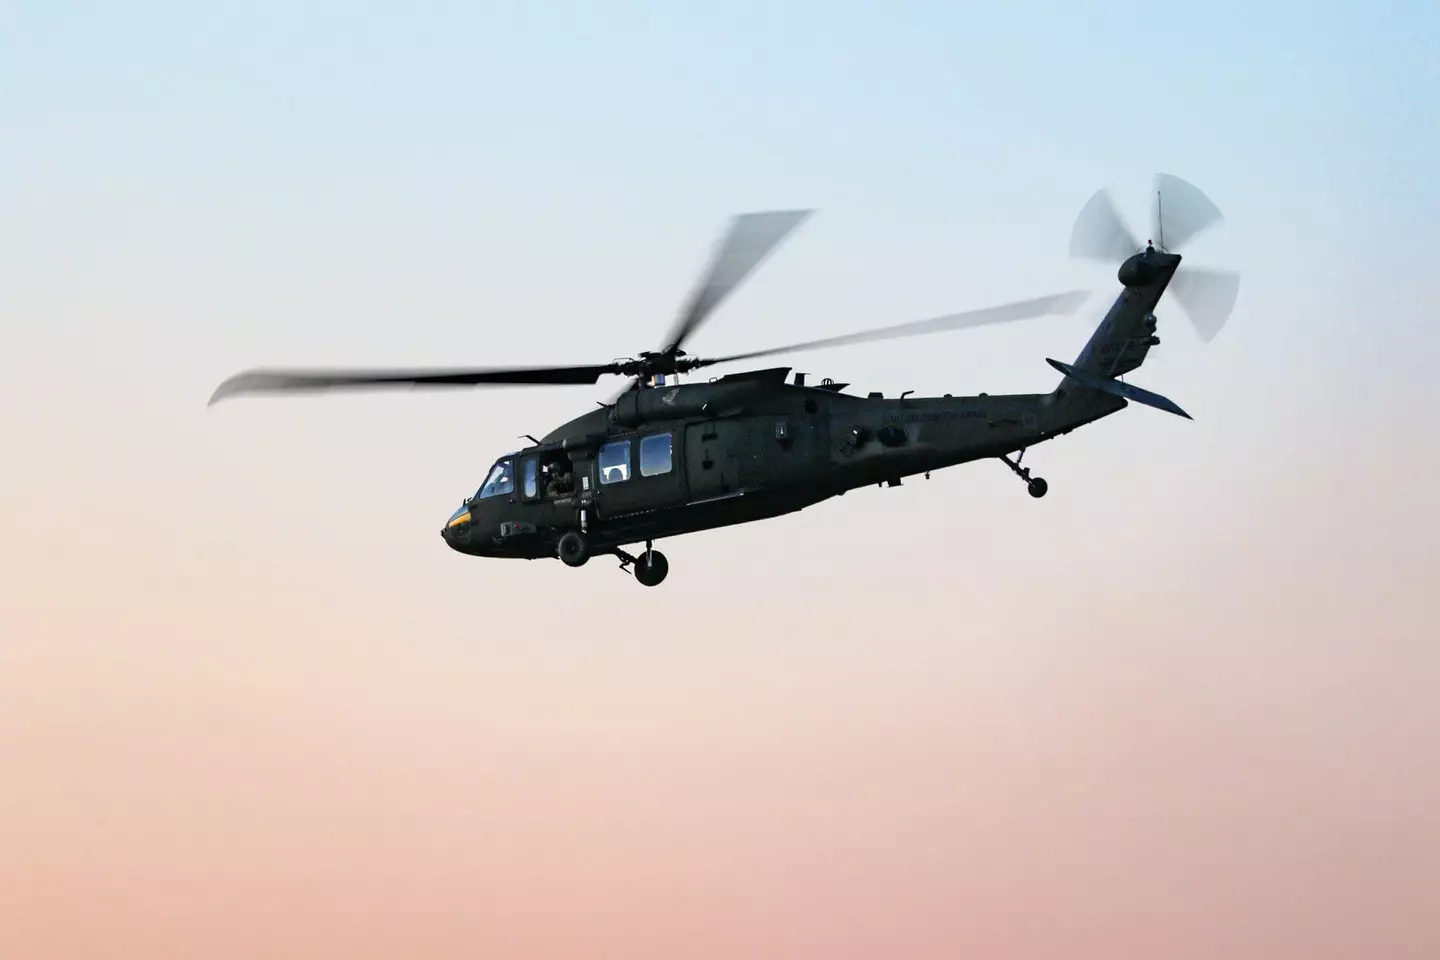 A Black Hawk helicopter was reportedly used as part of the operation.